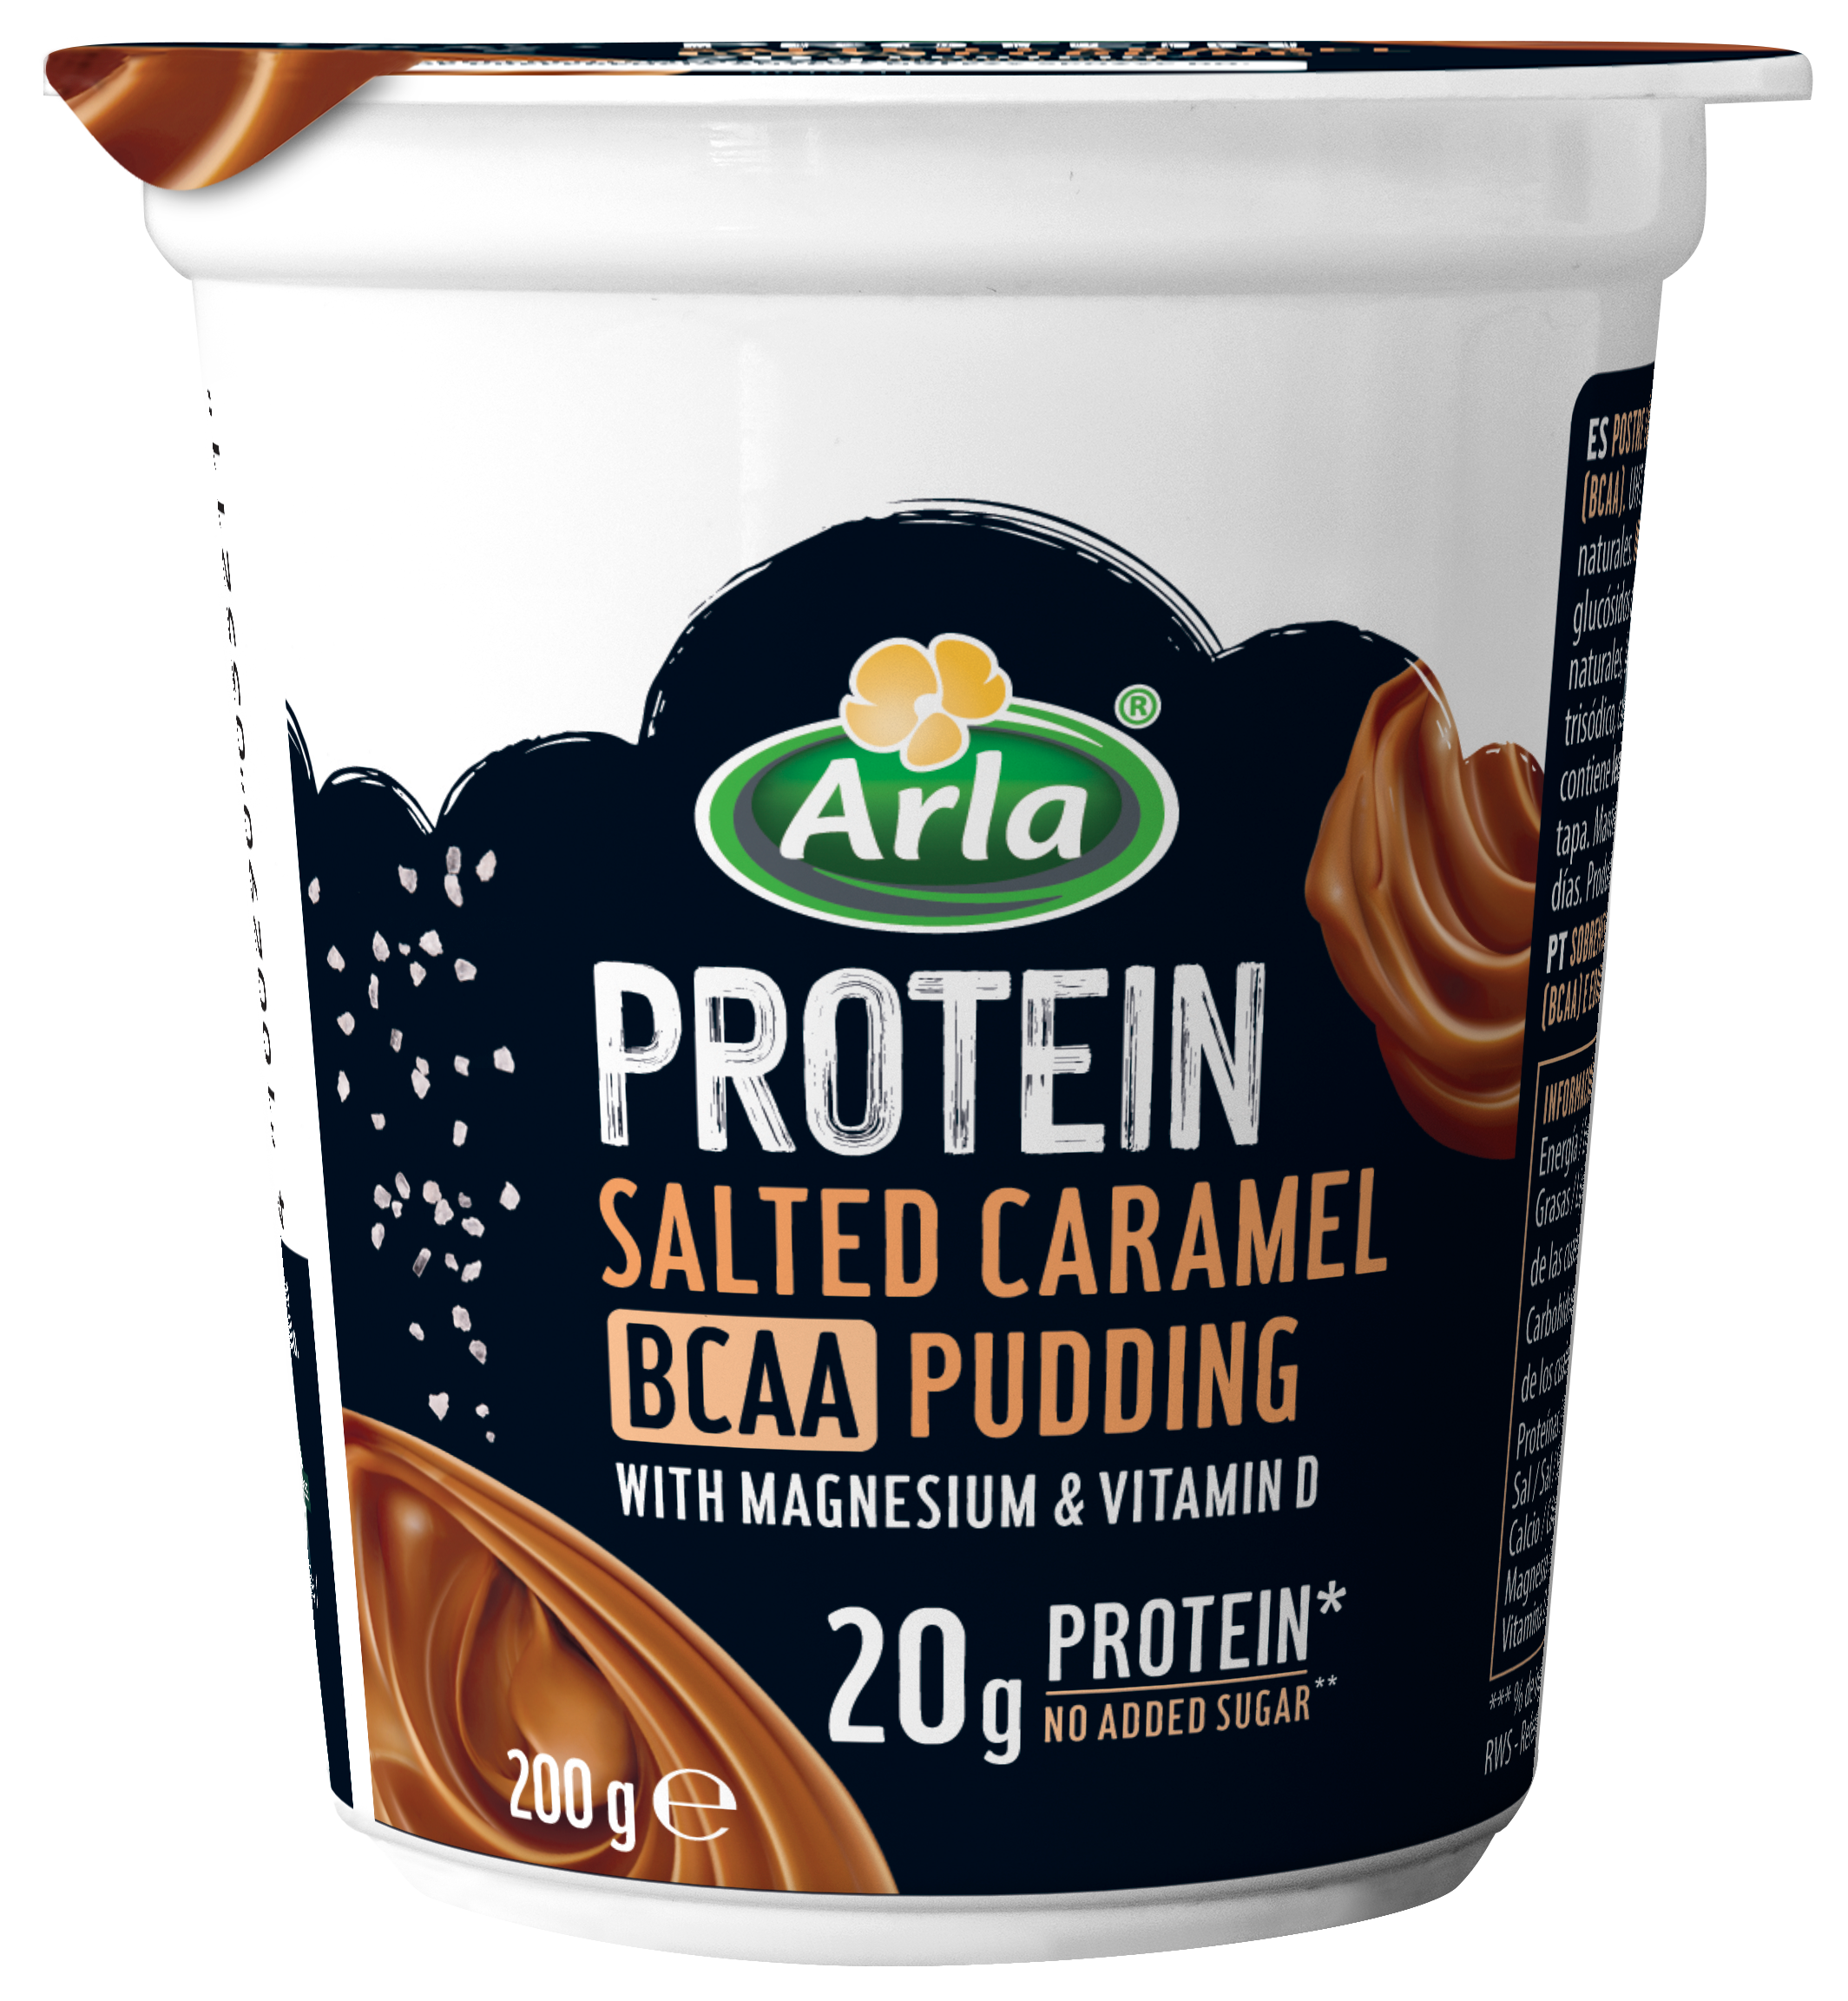 Pudding Protein Salted Caramel CAA *Sin Lactosa ni Azúcar añadido Pudding Protein Salted Caramel CAA *Sin Lactosa ni Azúcar añadido 200g